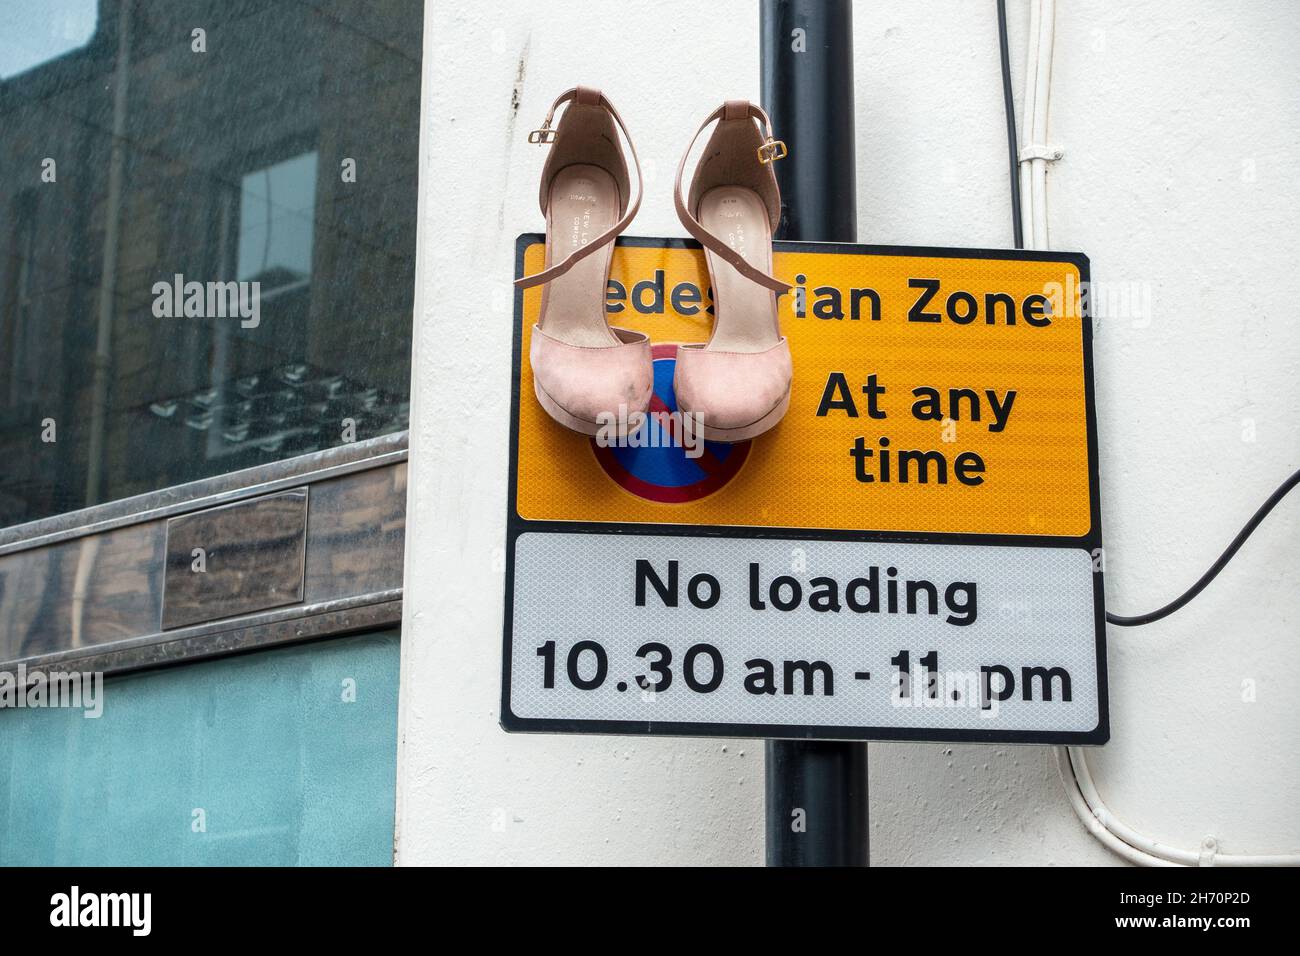 Lost Pair Of Womens High Heel Pink Shoes On A UK No Parking Sign Edinburgh Scotland Stock Photo